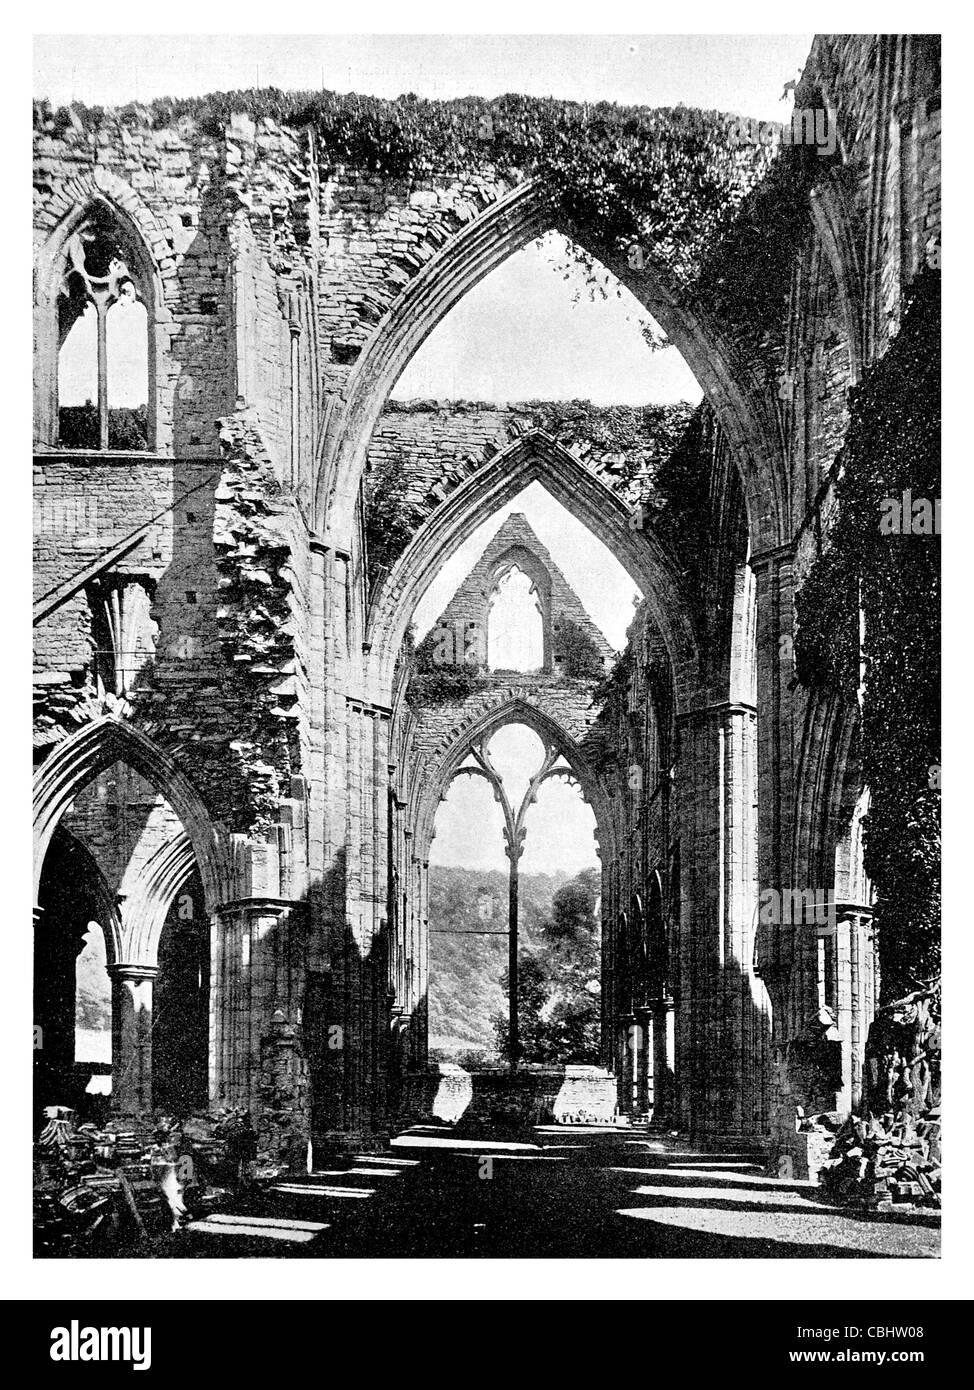 Romantic Ruins Tintern Abbey Walter de Clare Lord Chepstow Monmouthshire Wales England ruin ruined Stock Photo